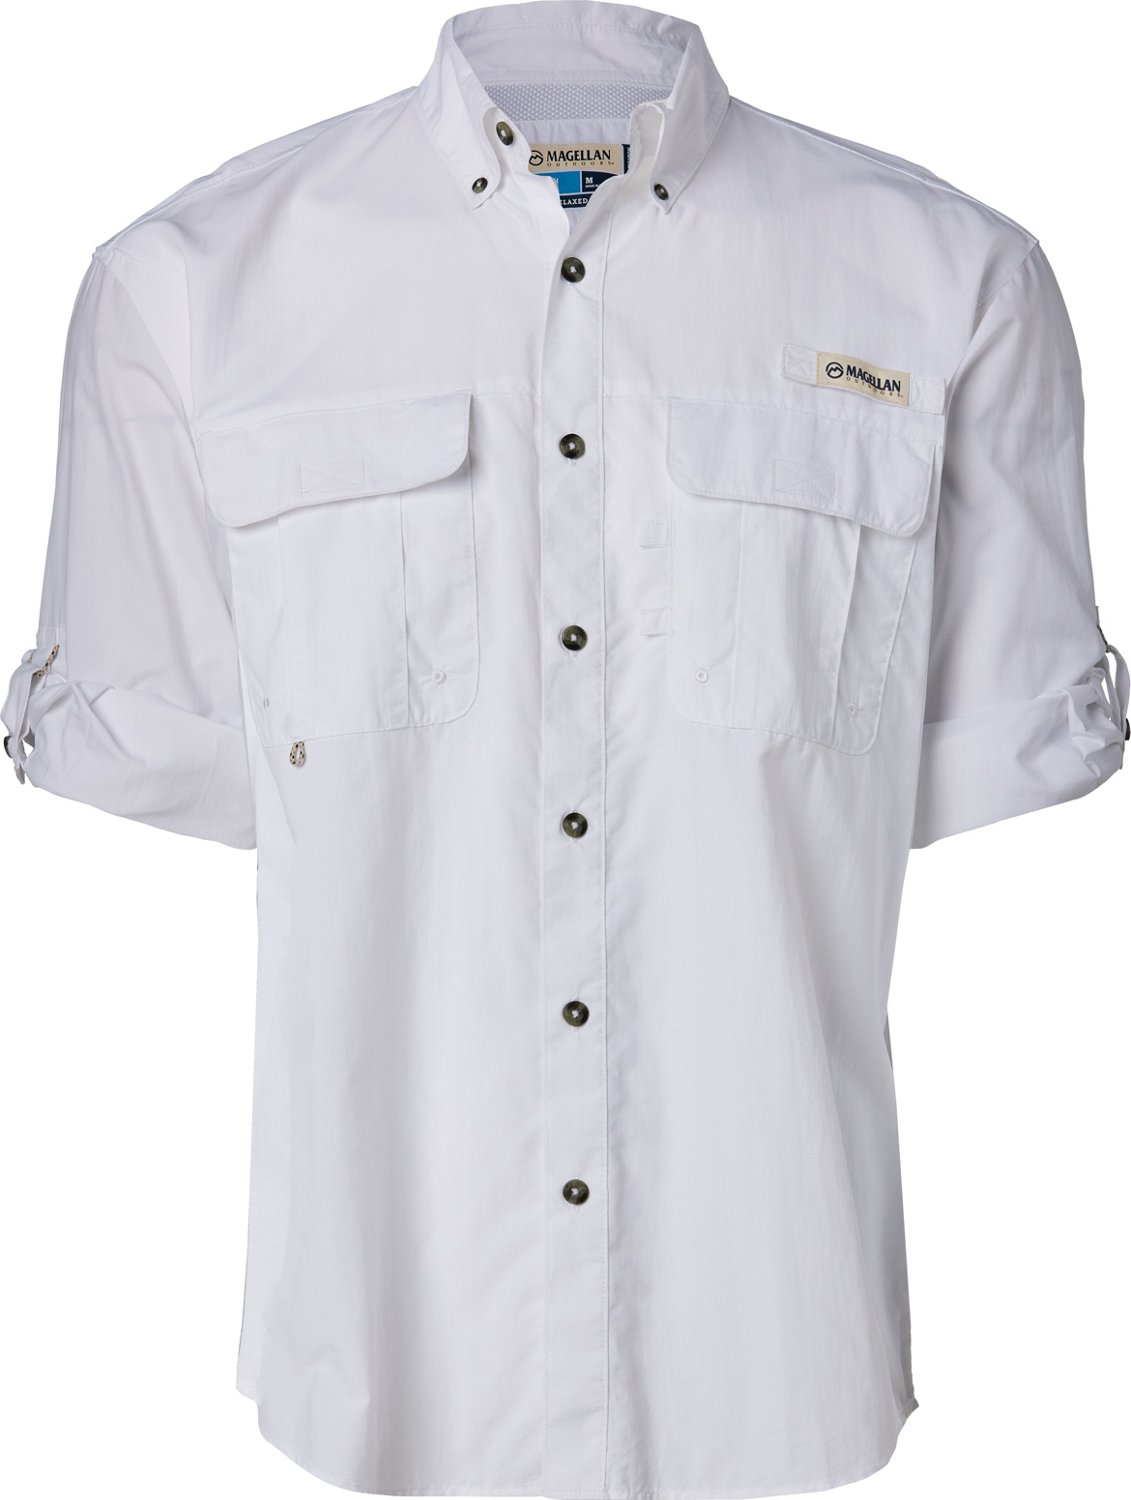 Magellan Outdoors Fishing Vented Shirt Wicking Relaxed Fit